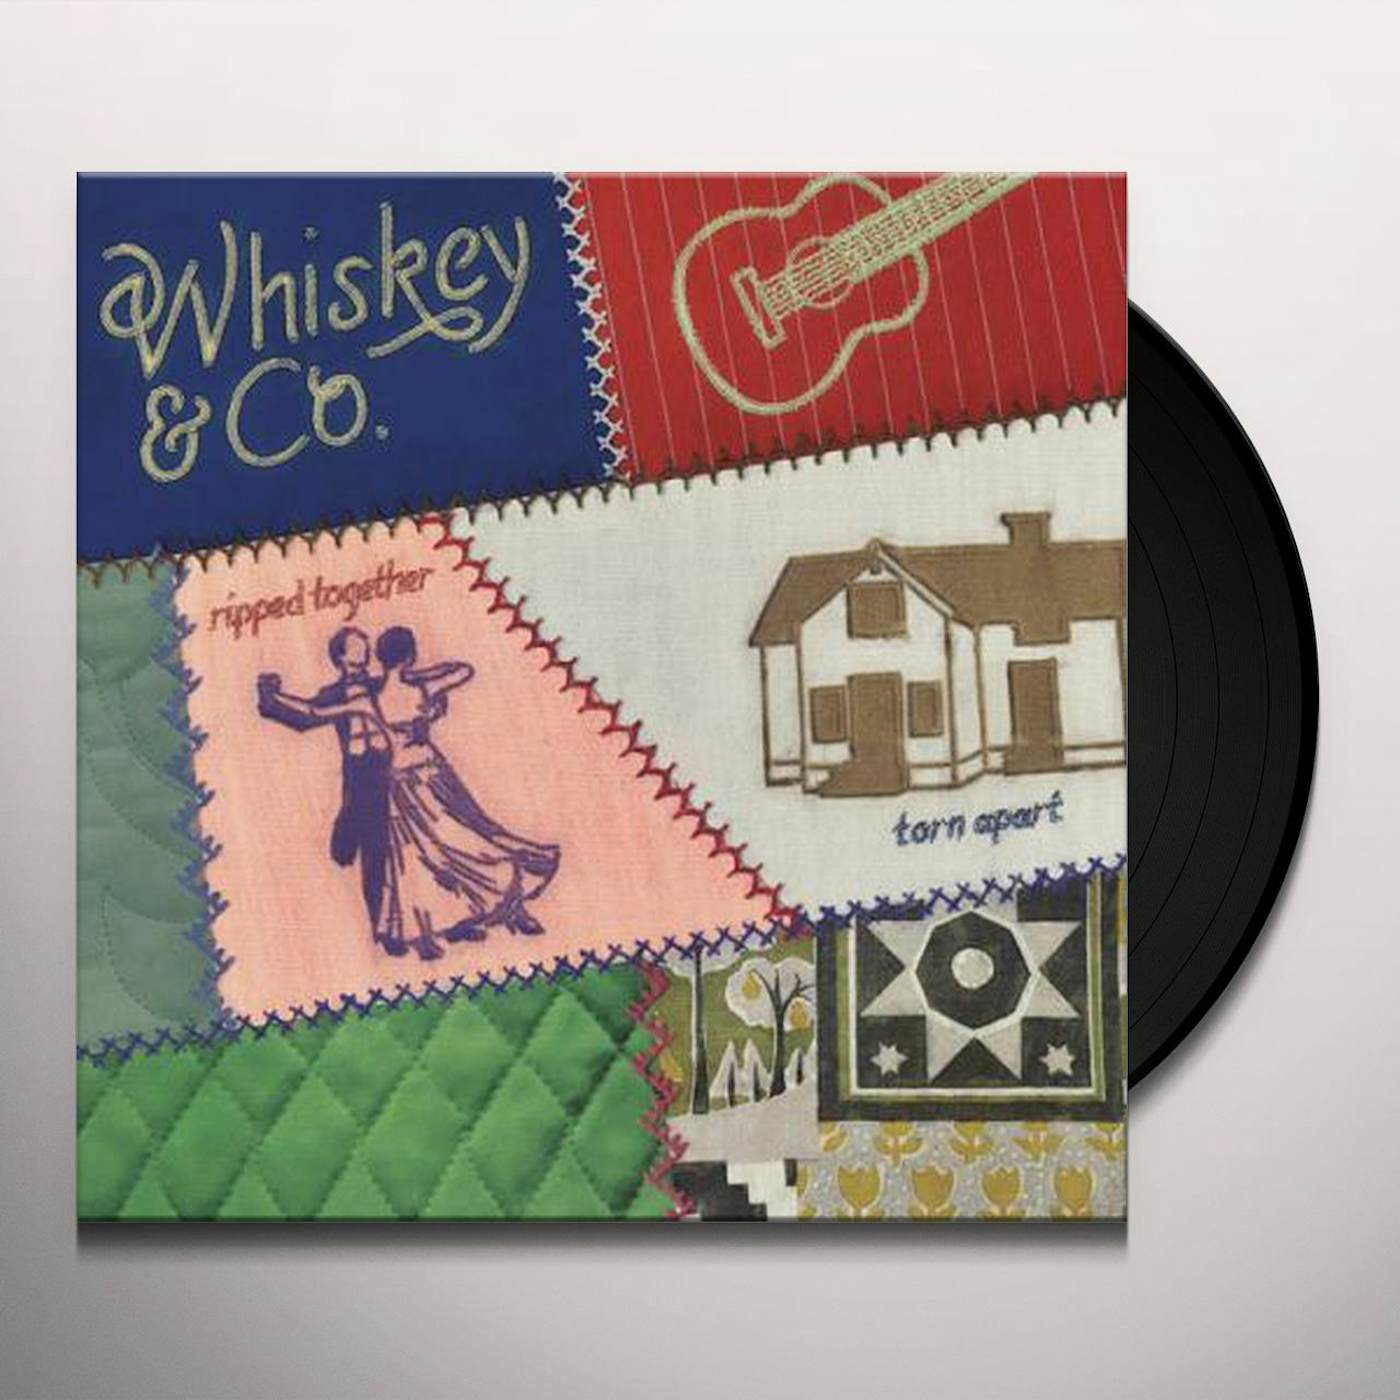 Whiskey & Co. RIPPED TOGETHER TORN APART Vinyl Record